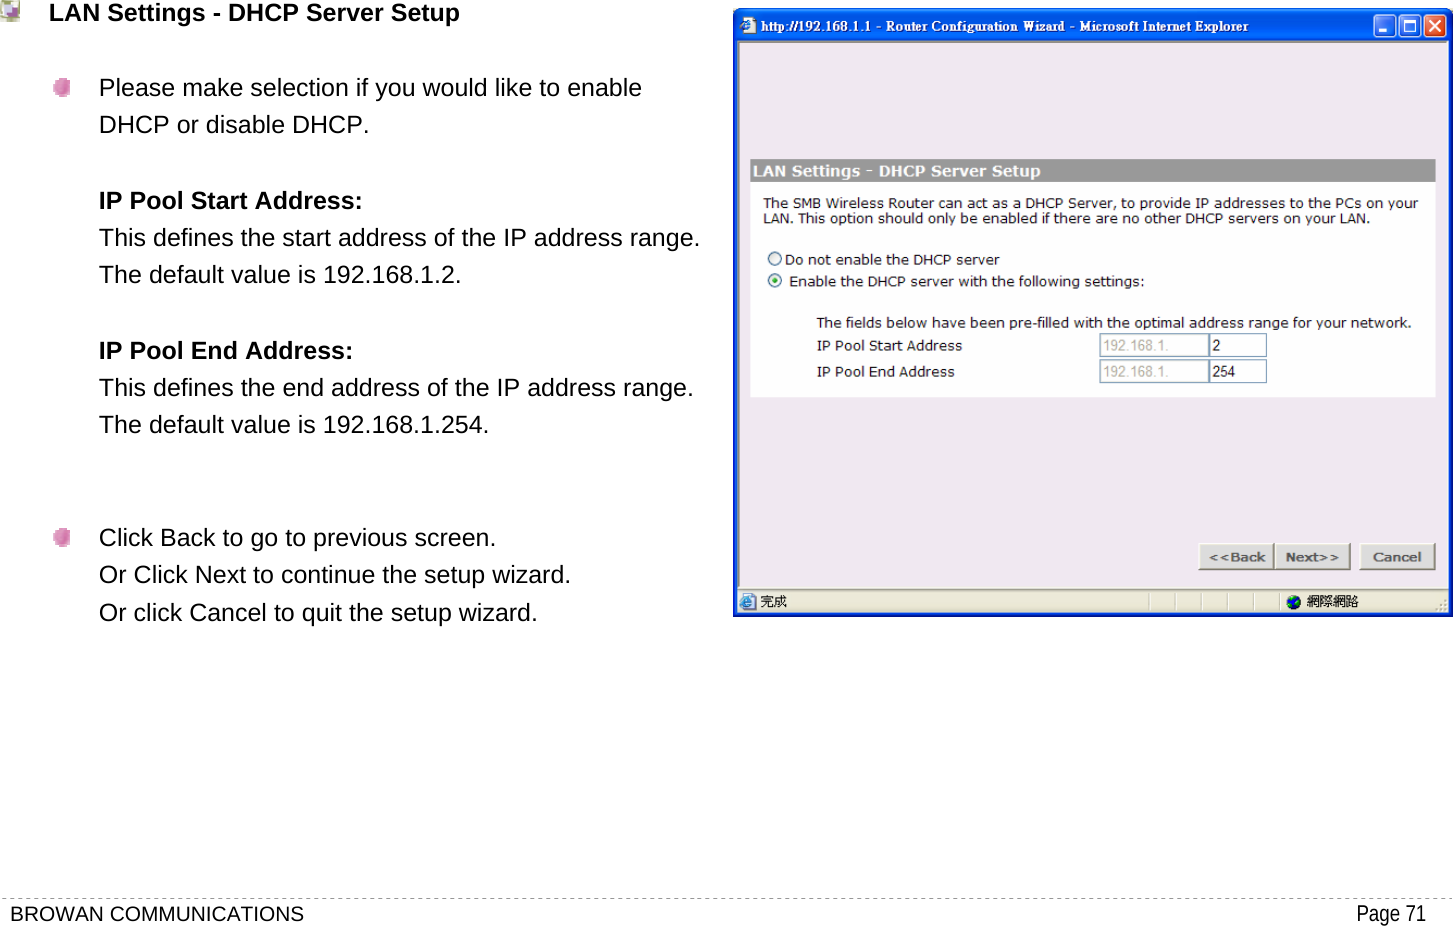 BROWAN COMMUNICATIONS                                                                                           Page 71   LAN Settings - DHCP Server Setup    Please make selection if you would like to enable DHCP or disable DHCP.  IP Pool Start Address: This defines the start address of the IP address range. The default value is 192.168.1.2.  IP Pool End Address: This defines the end address of the IP address range. The default value is 192.168.1.254.     Click Back to go to previous screen. Or Click Next to continue the setup wizard. Or click Cancel to quit the setup wizard.      